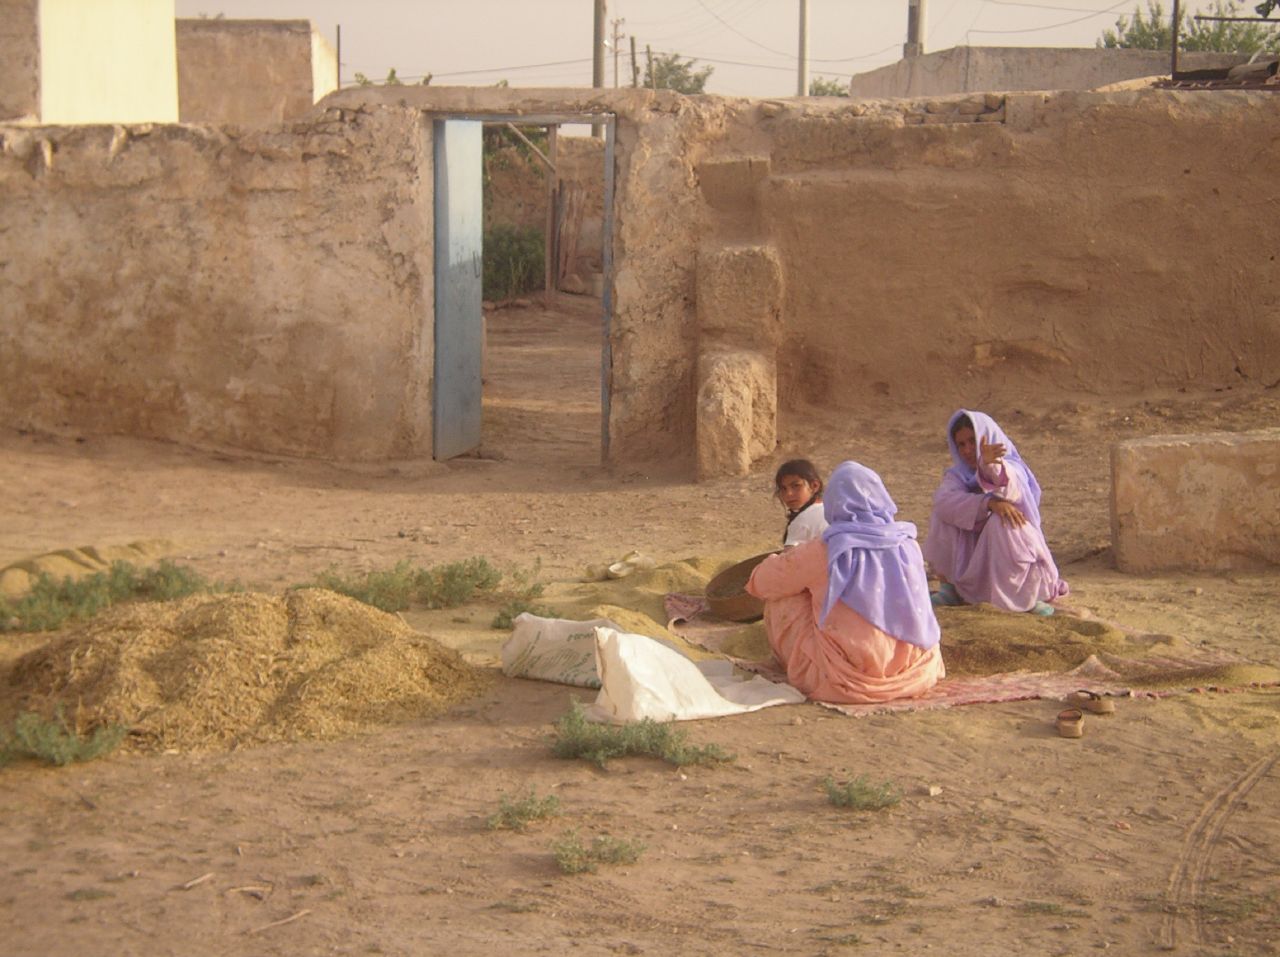 two girls sitting by a house next to an area with sand